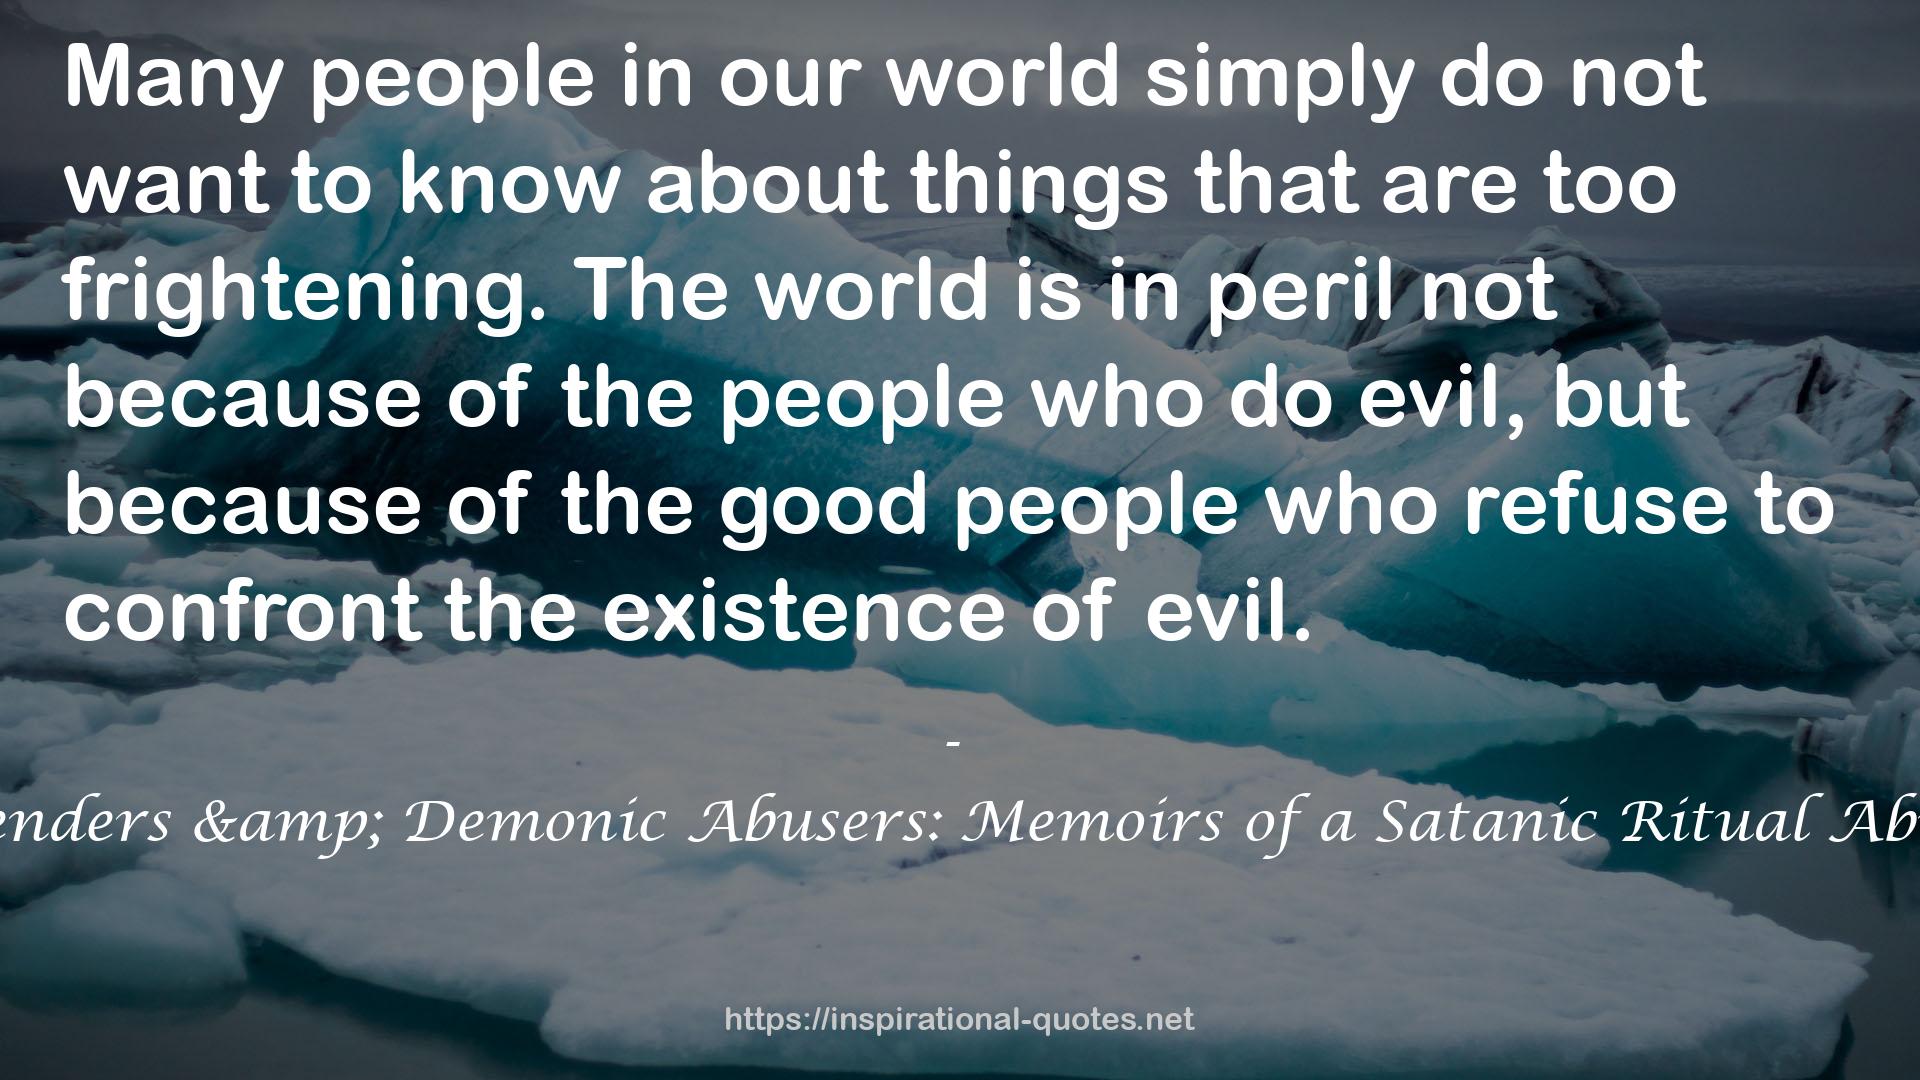 Angelic Defenders & Demonic Abusers: Memoirs of a Satanic Ritual Abuse Survivor QUOTES